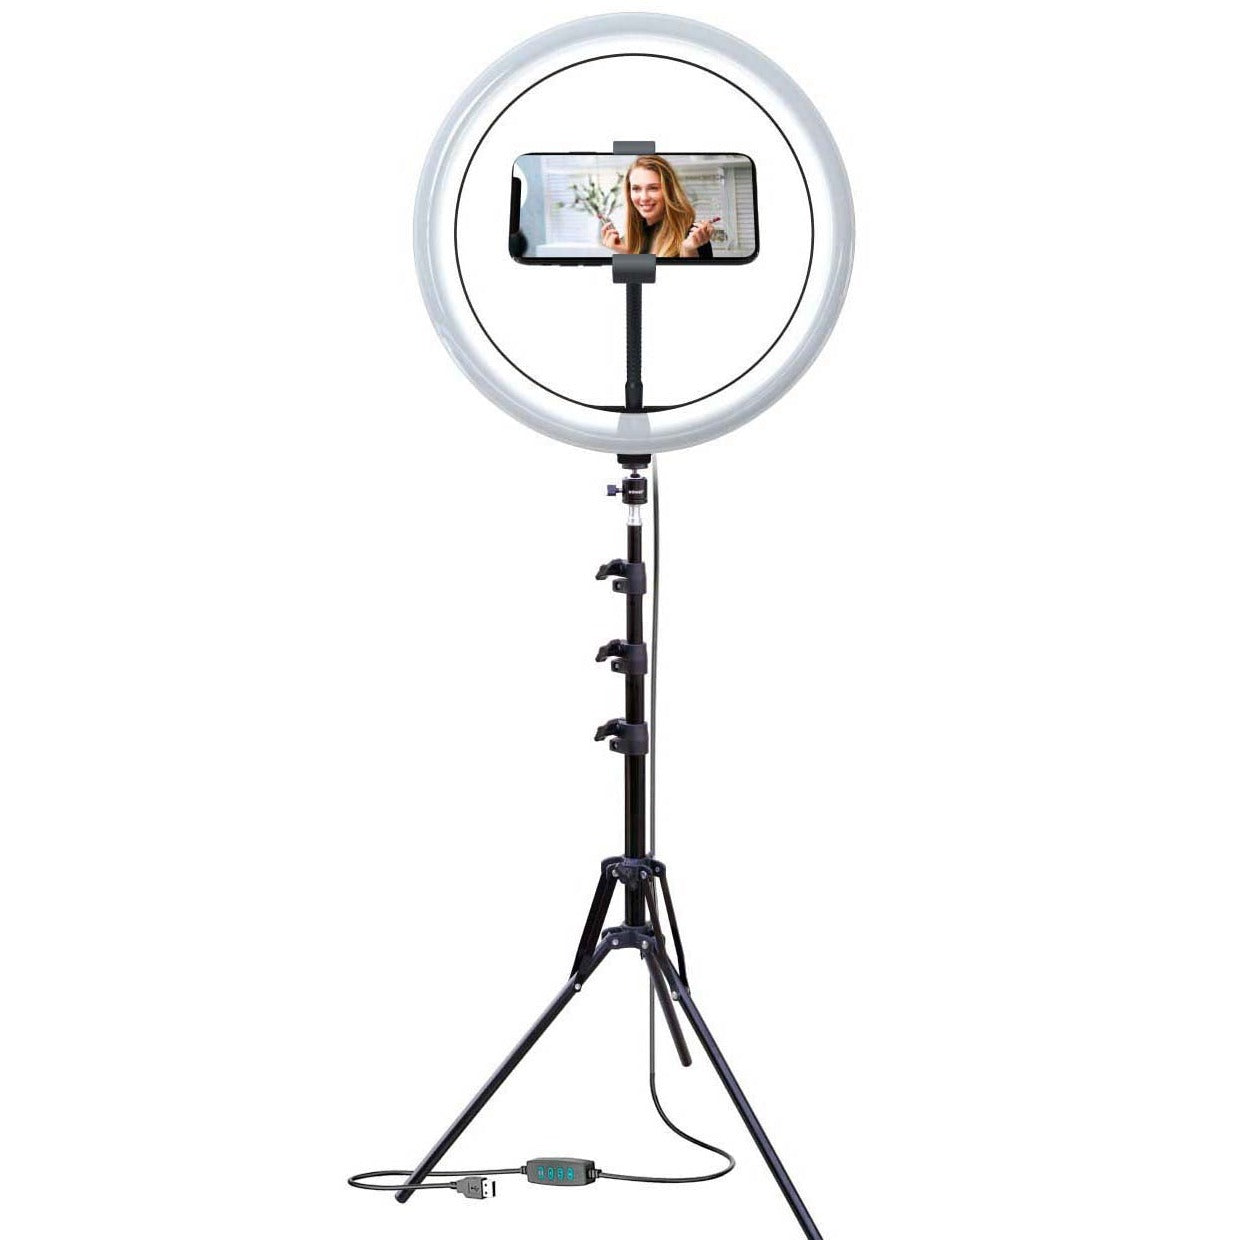 Amazon.com: Aduro U-Stream 3-in-1 Ring Light Studio Kit Bundle, Set  Includes LED Ring Light with Stand, Clip On Phone Selfie Ring Light & 6ft  LED Strip Lights : Cell Phones & Accessories